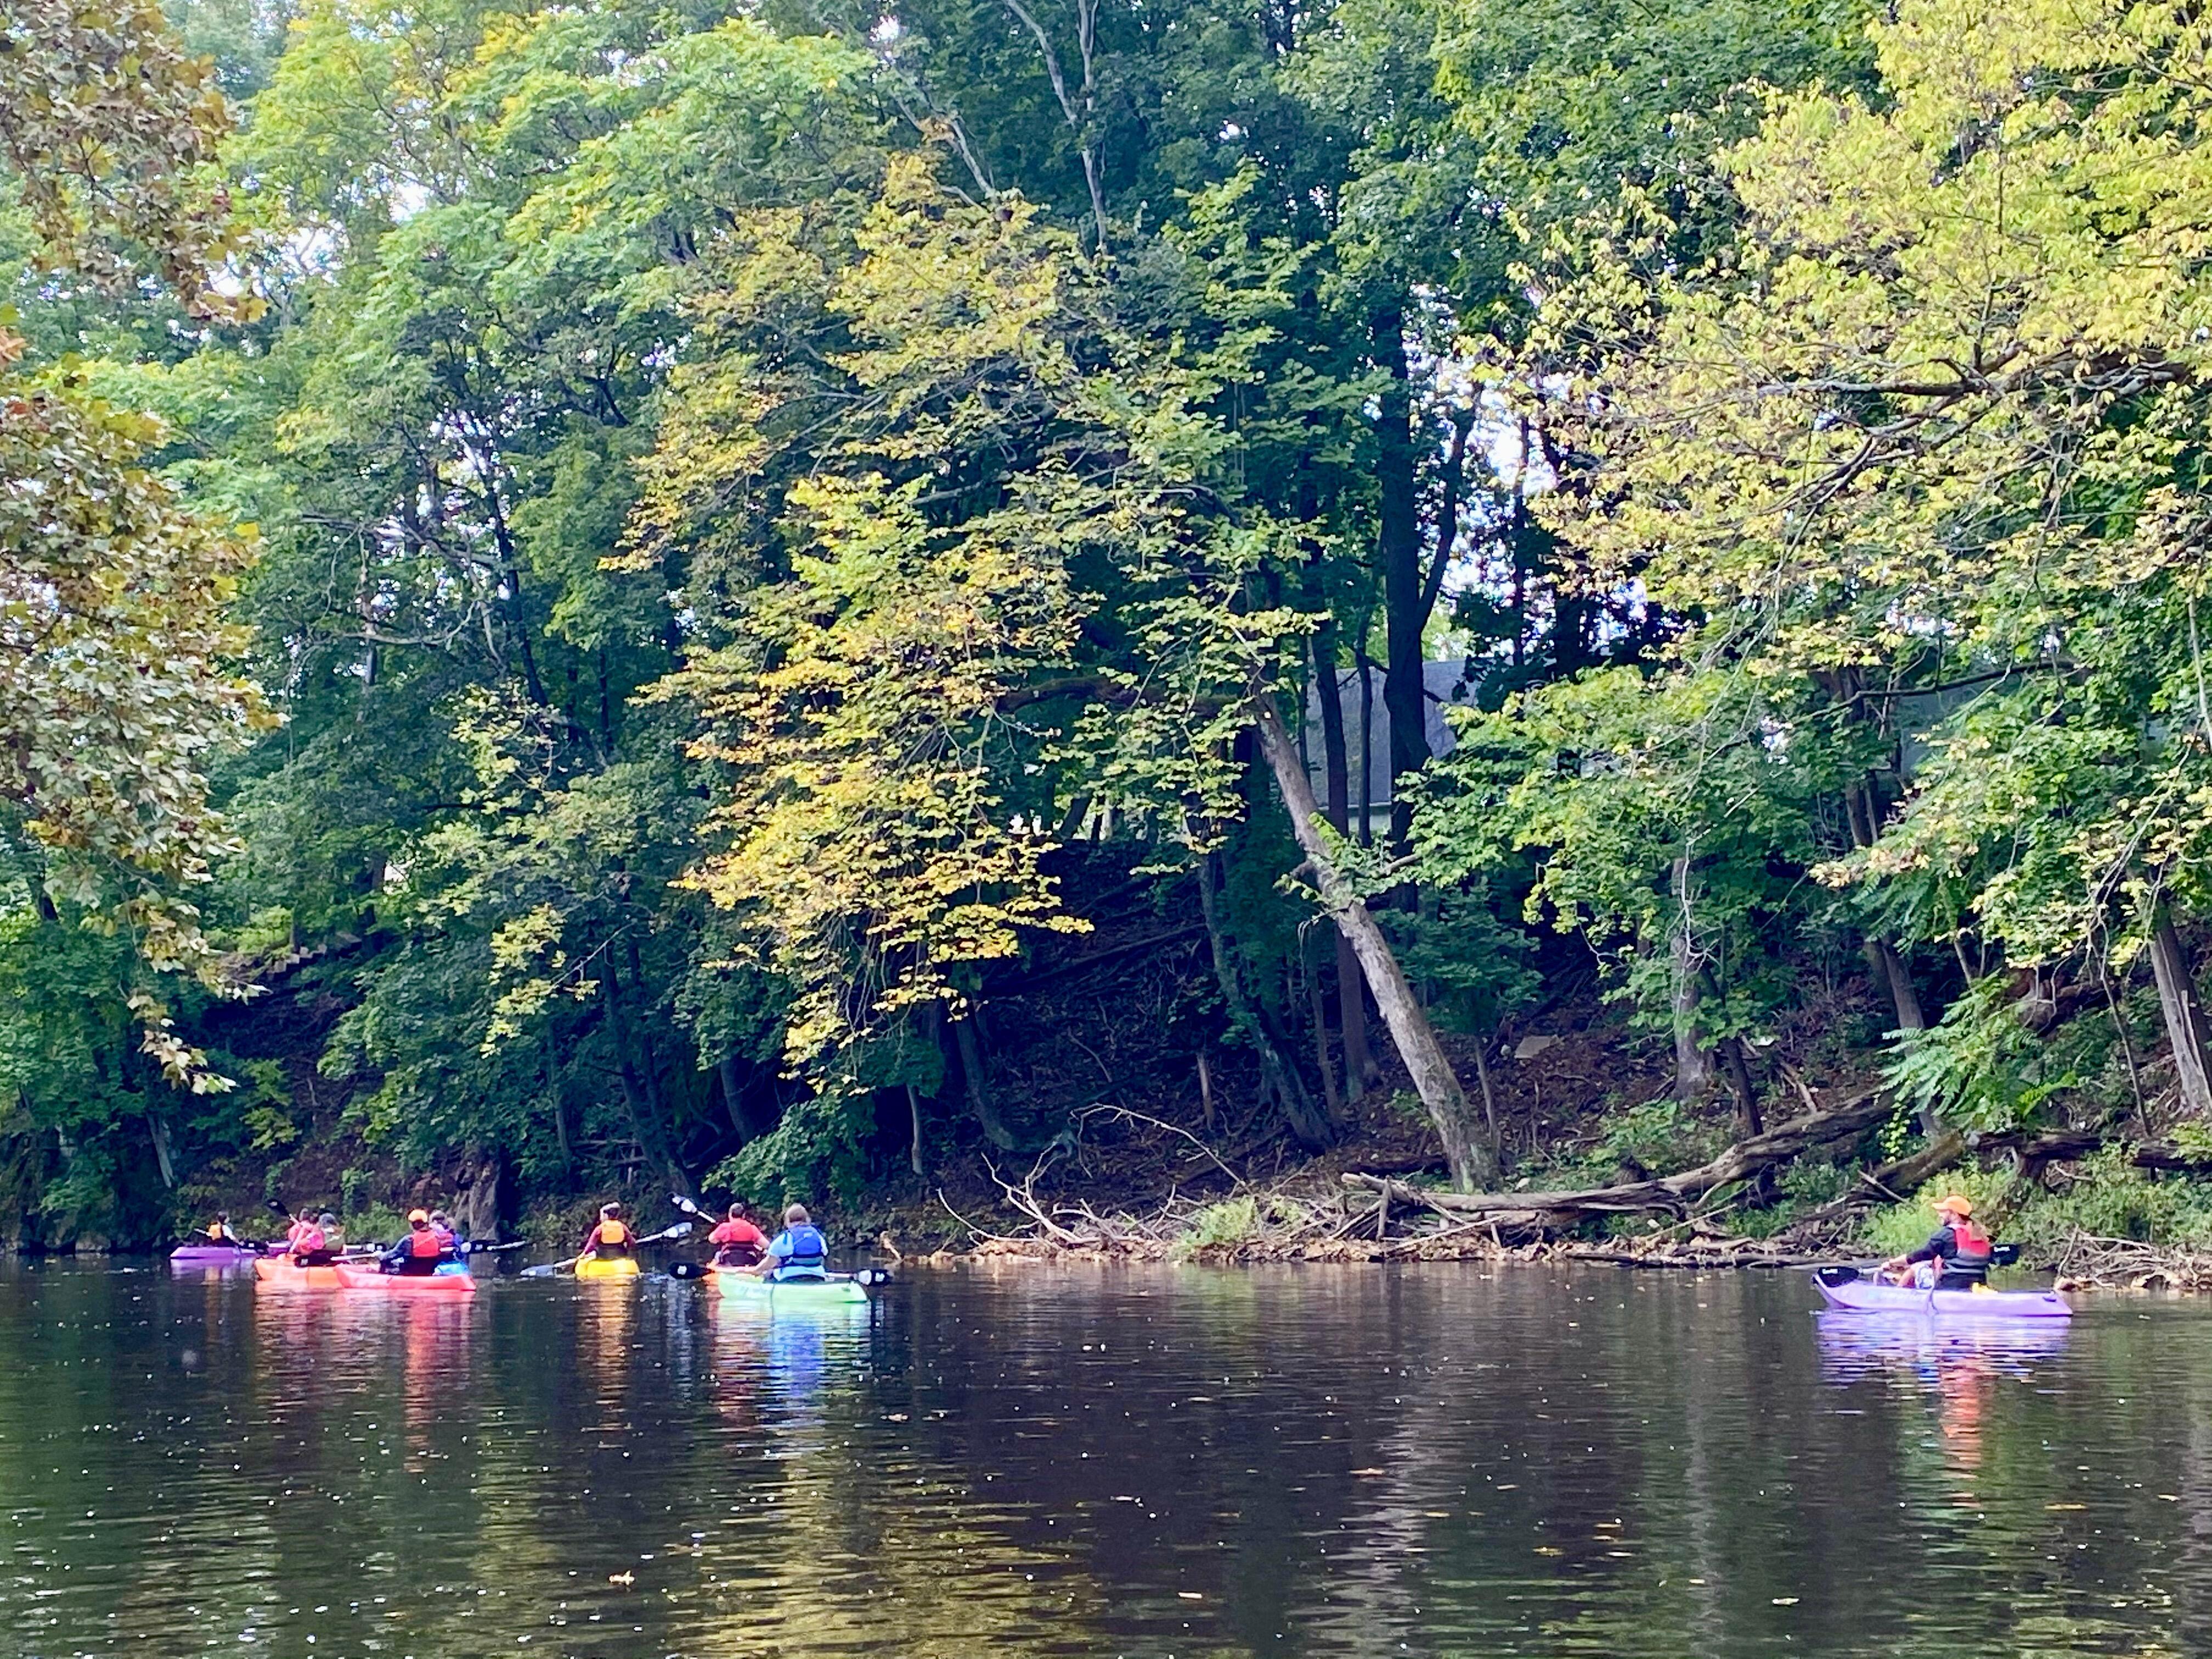 kayakers on the water